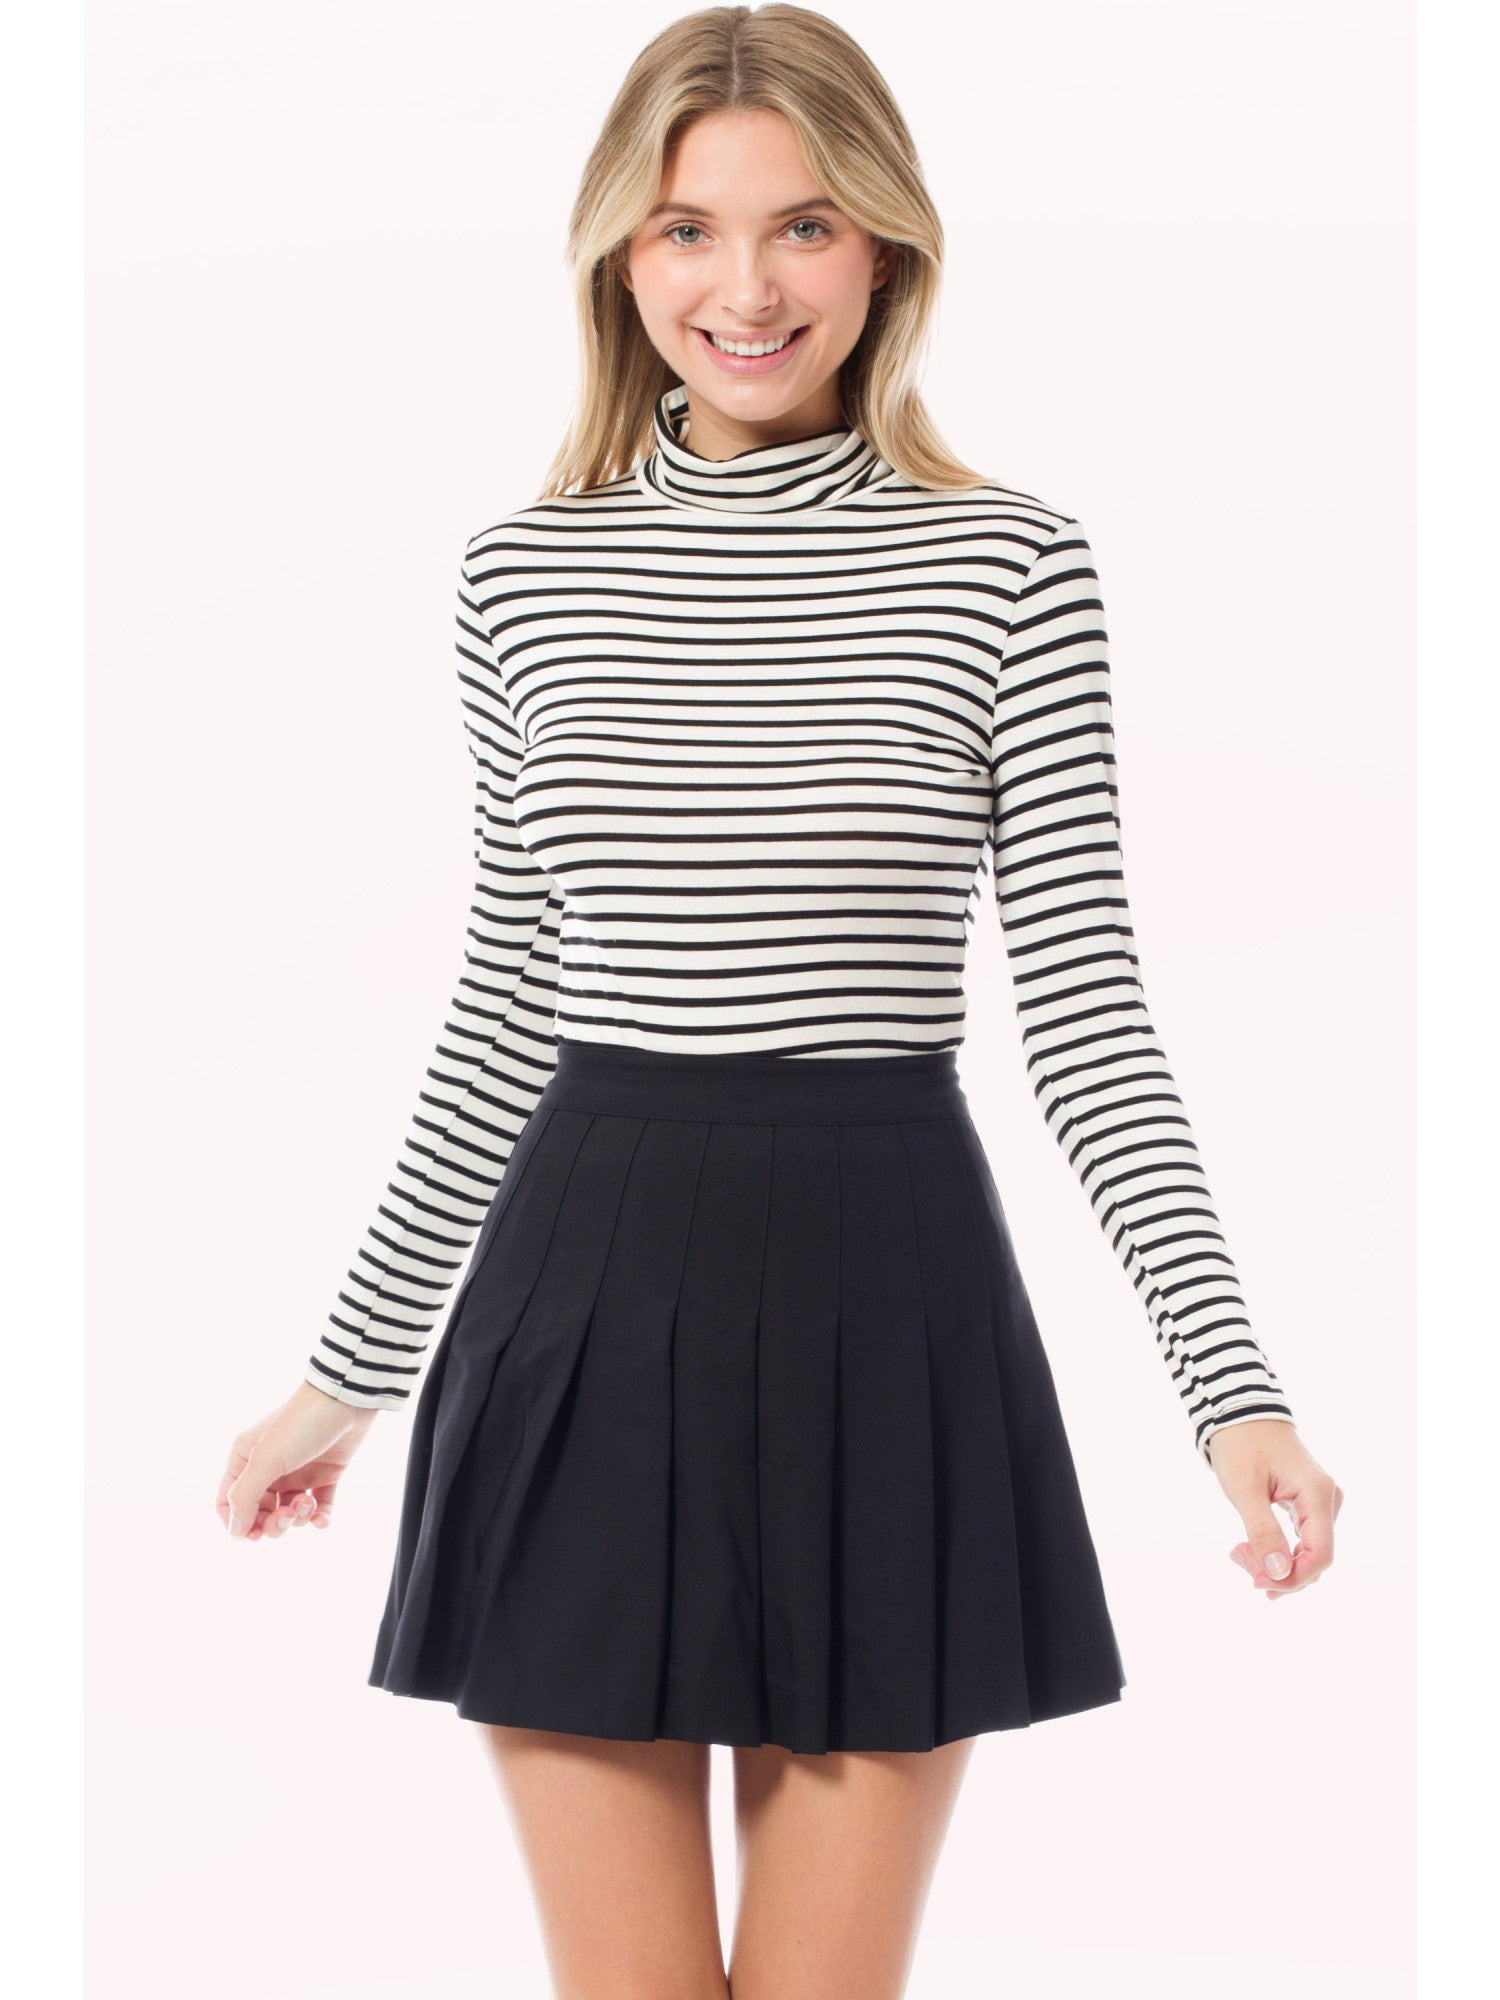 Tight Fit Lightweight Solid/Stripe Long Sleeves Turtle Neck Top